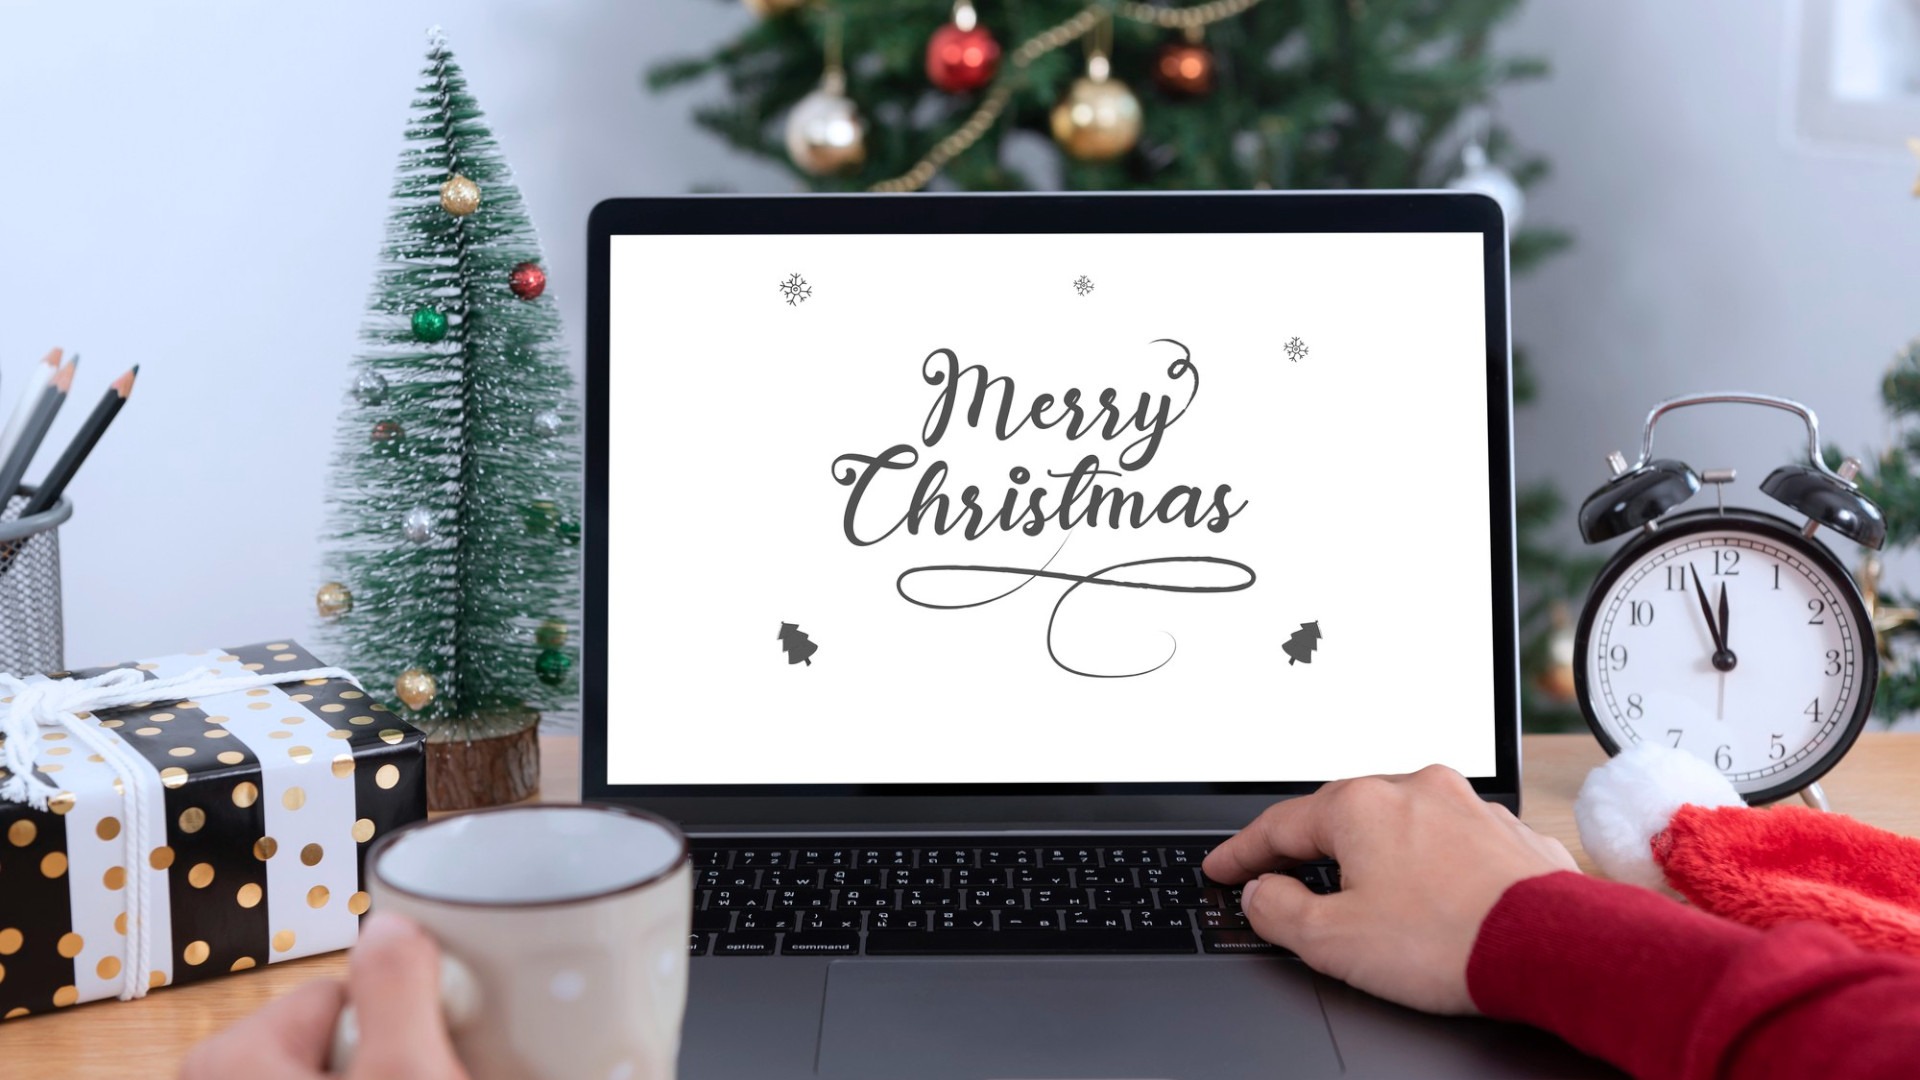 Preparing Your Website for the Holiday Season